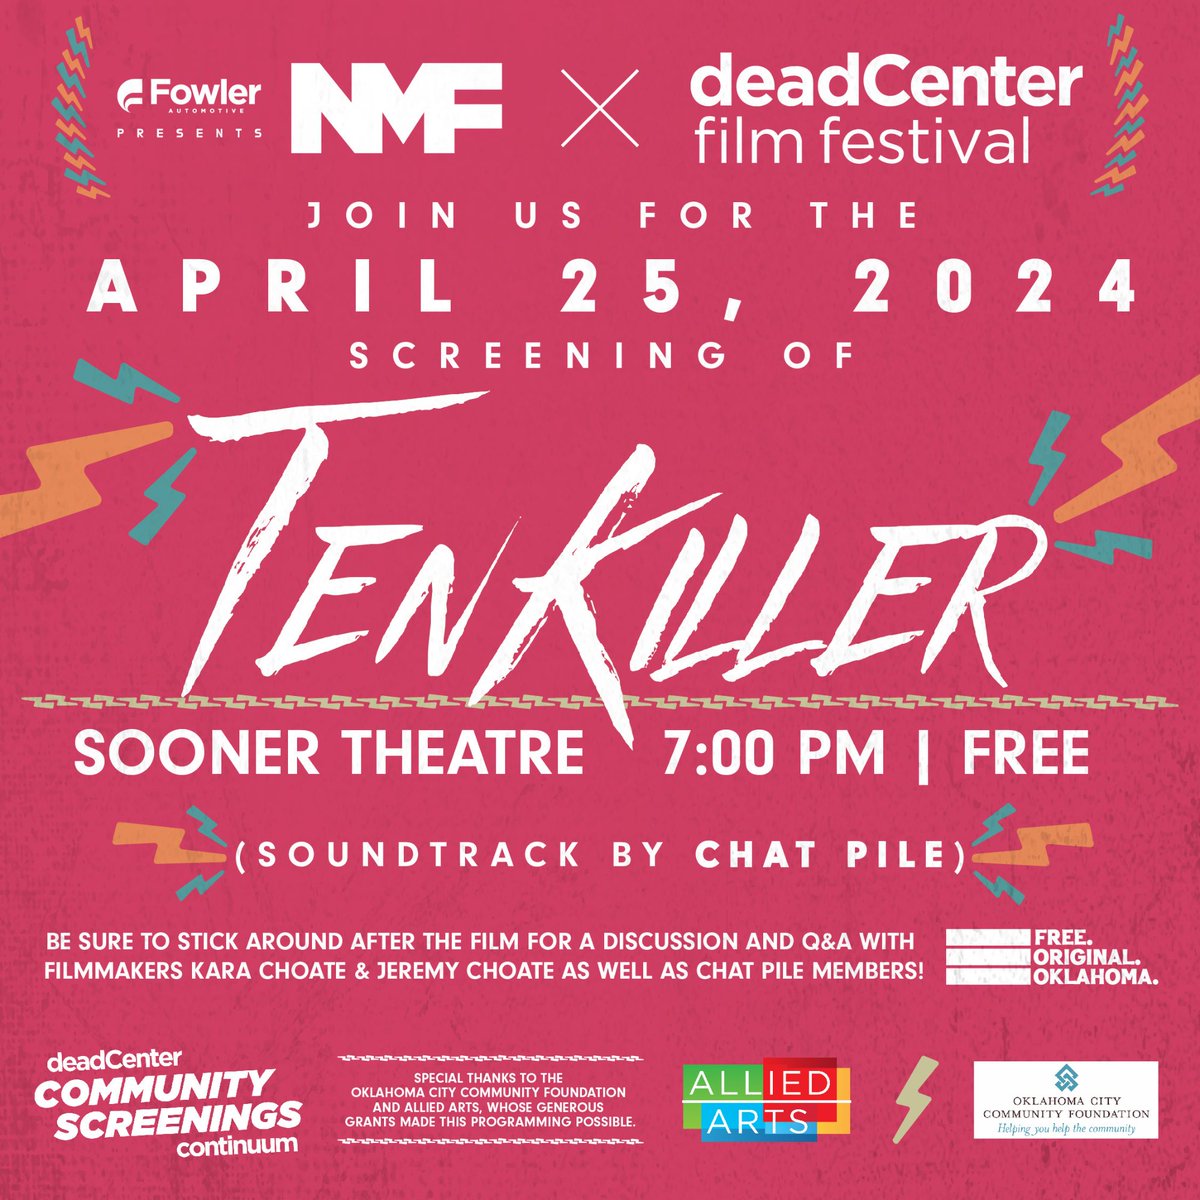 Headed to @NormanMusicFest? See Oklahoma film 'Tenkiller,' presented by @deadcenter, Thur. at 7pm at Sooner Theatre, with a conversation with the filmmakers & @ChatPileBand, who composed the soundtrack.

Admission is FREE! RSVP here: deadcentercontinuum.eventive.org/schedule

#OkieFilm #OkieMusic